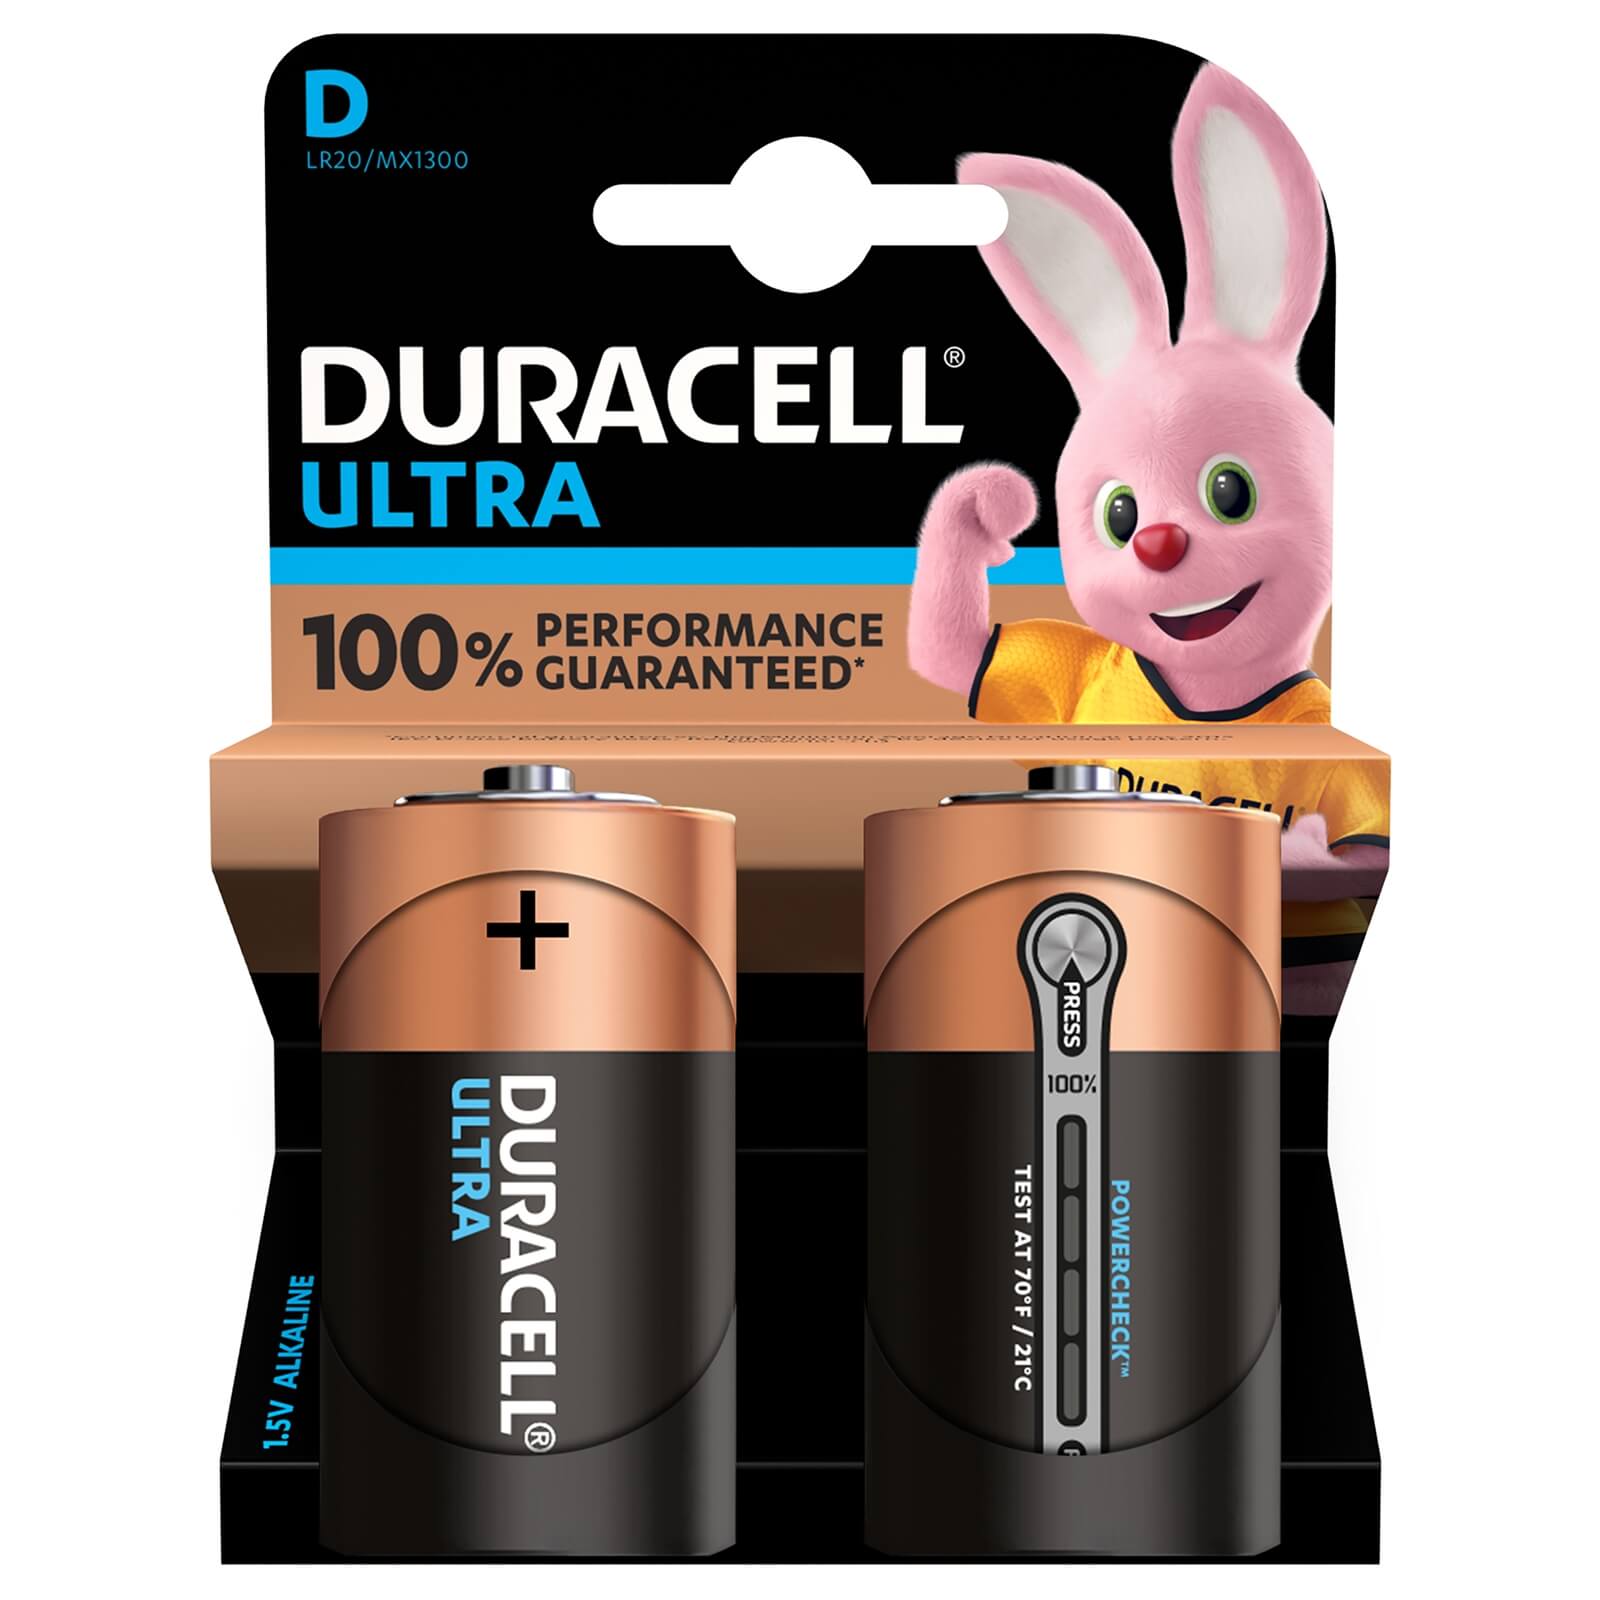 Duracell Ultra MX 1300 D - Packet of 2